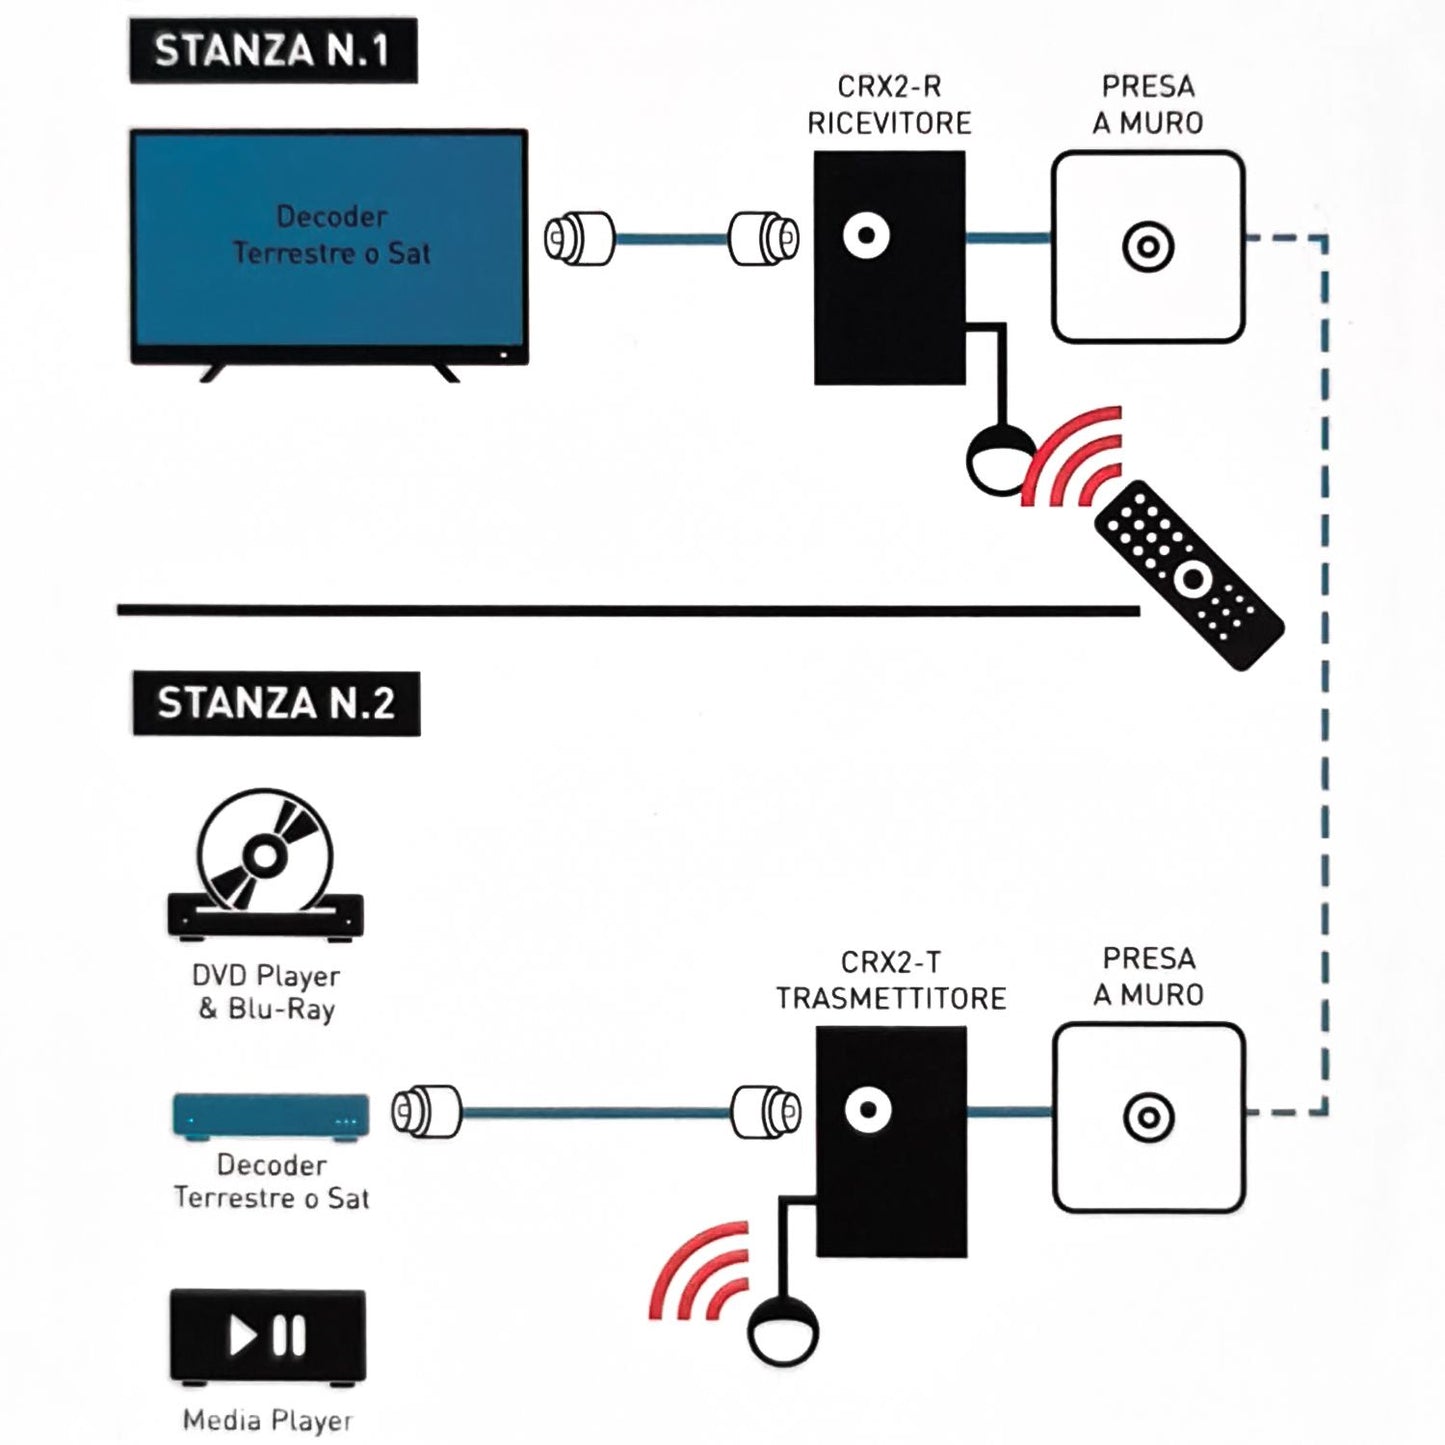 TELE System CRX2RT IR signal transmitter, repeater and remote control extender via coaxial cable